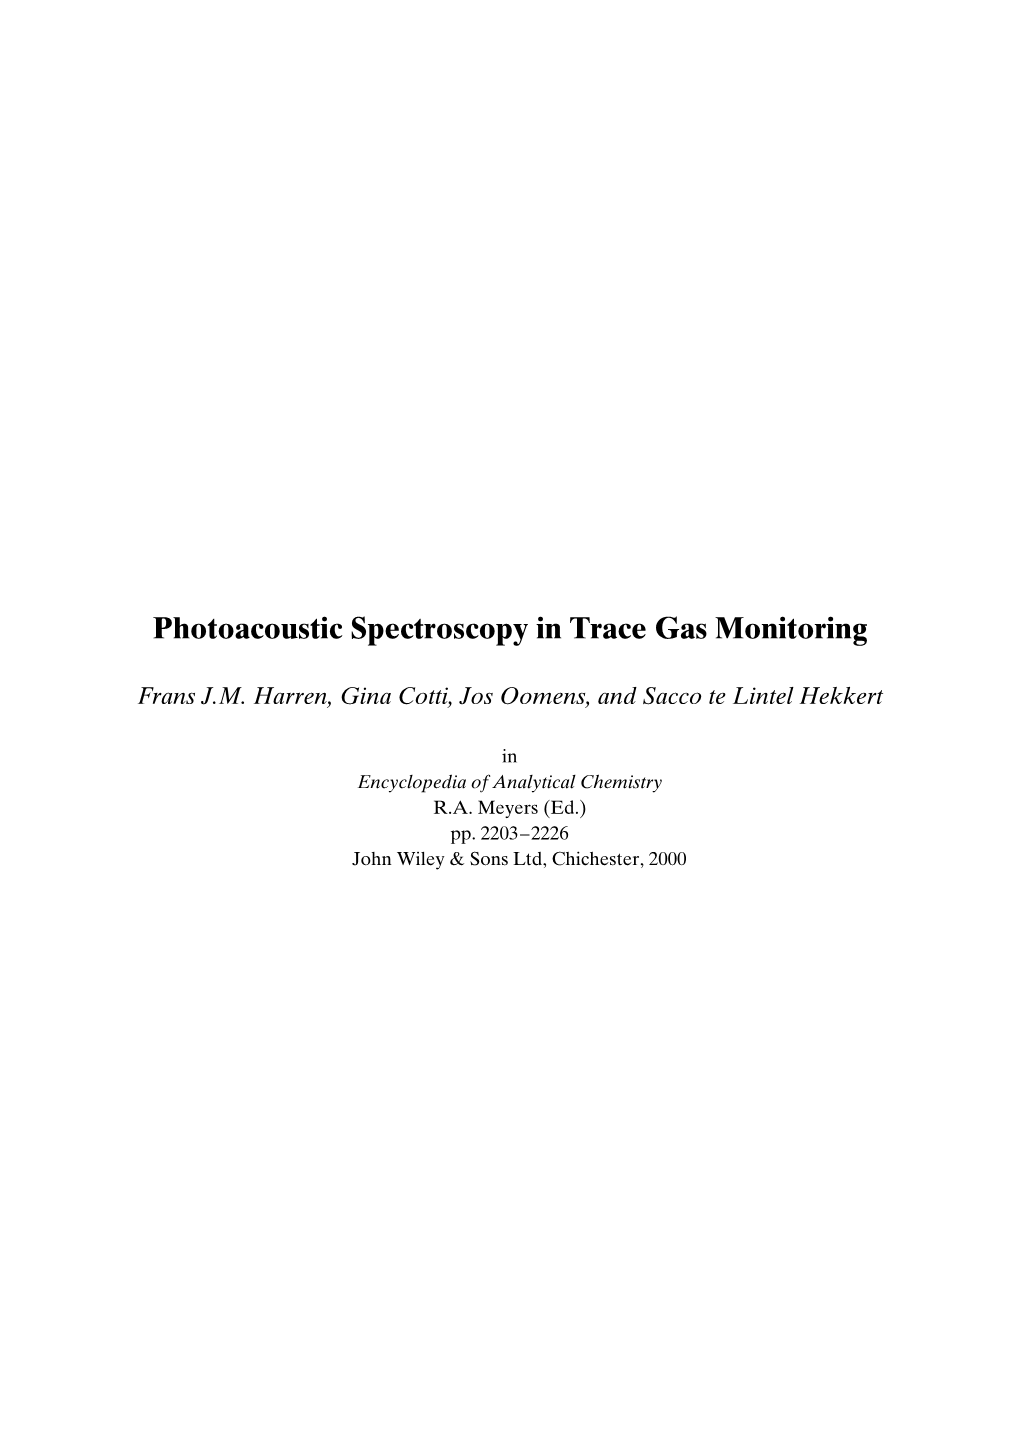 Photoacoustic Spectroscopy in Trace Gas Monitoring